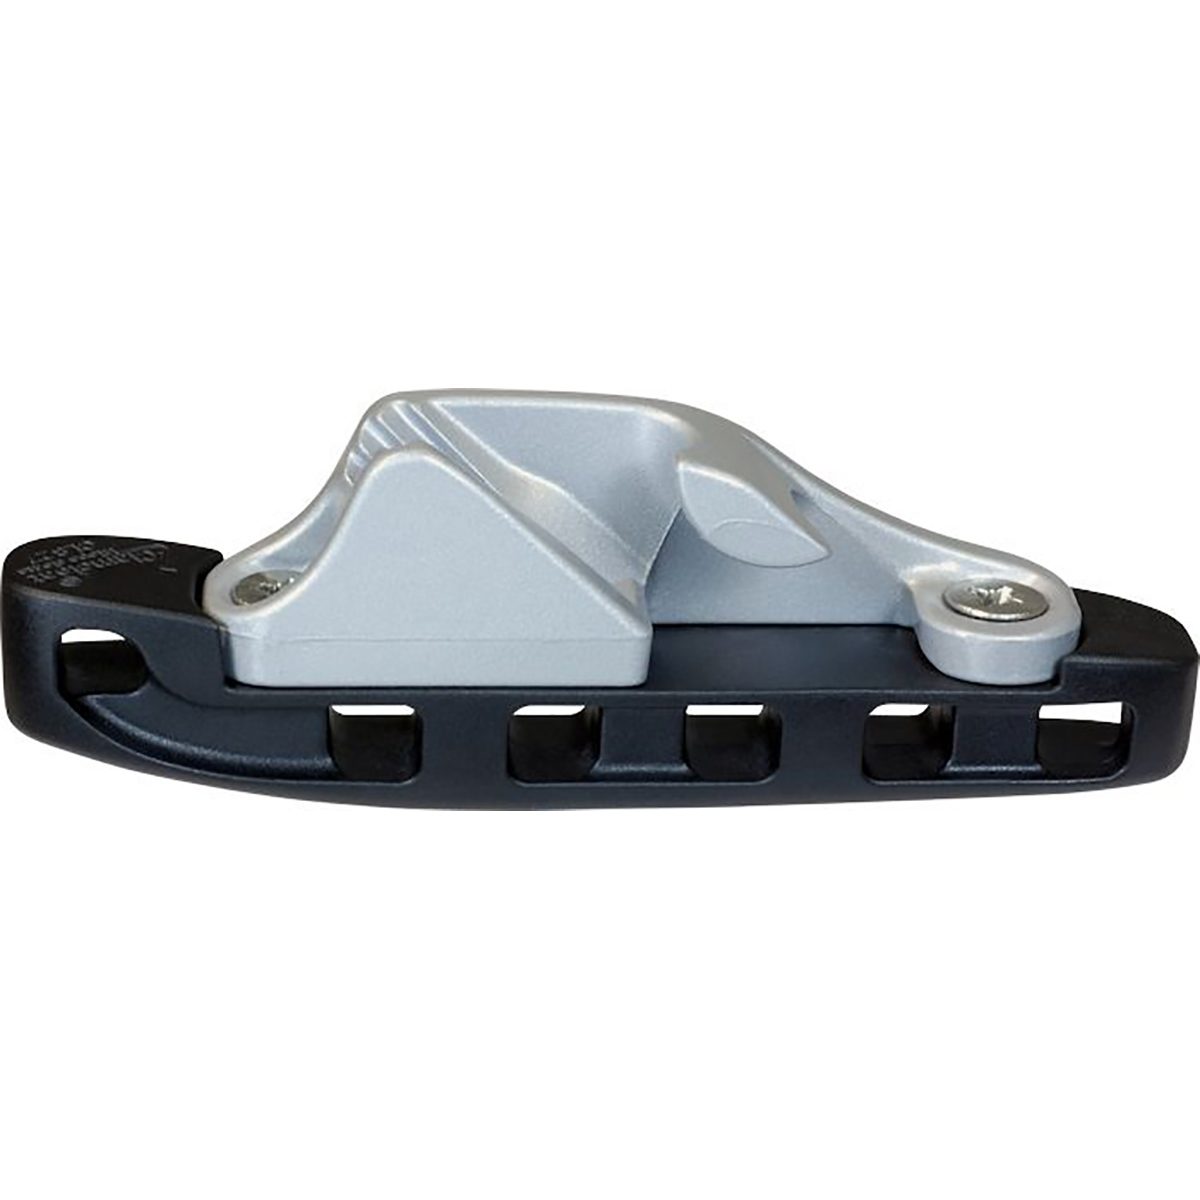 C827-17R - Clamcleat Aero Base With C217M1A (Pk Size: 1)